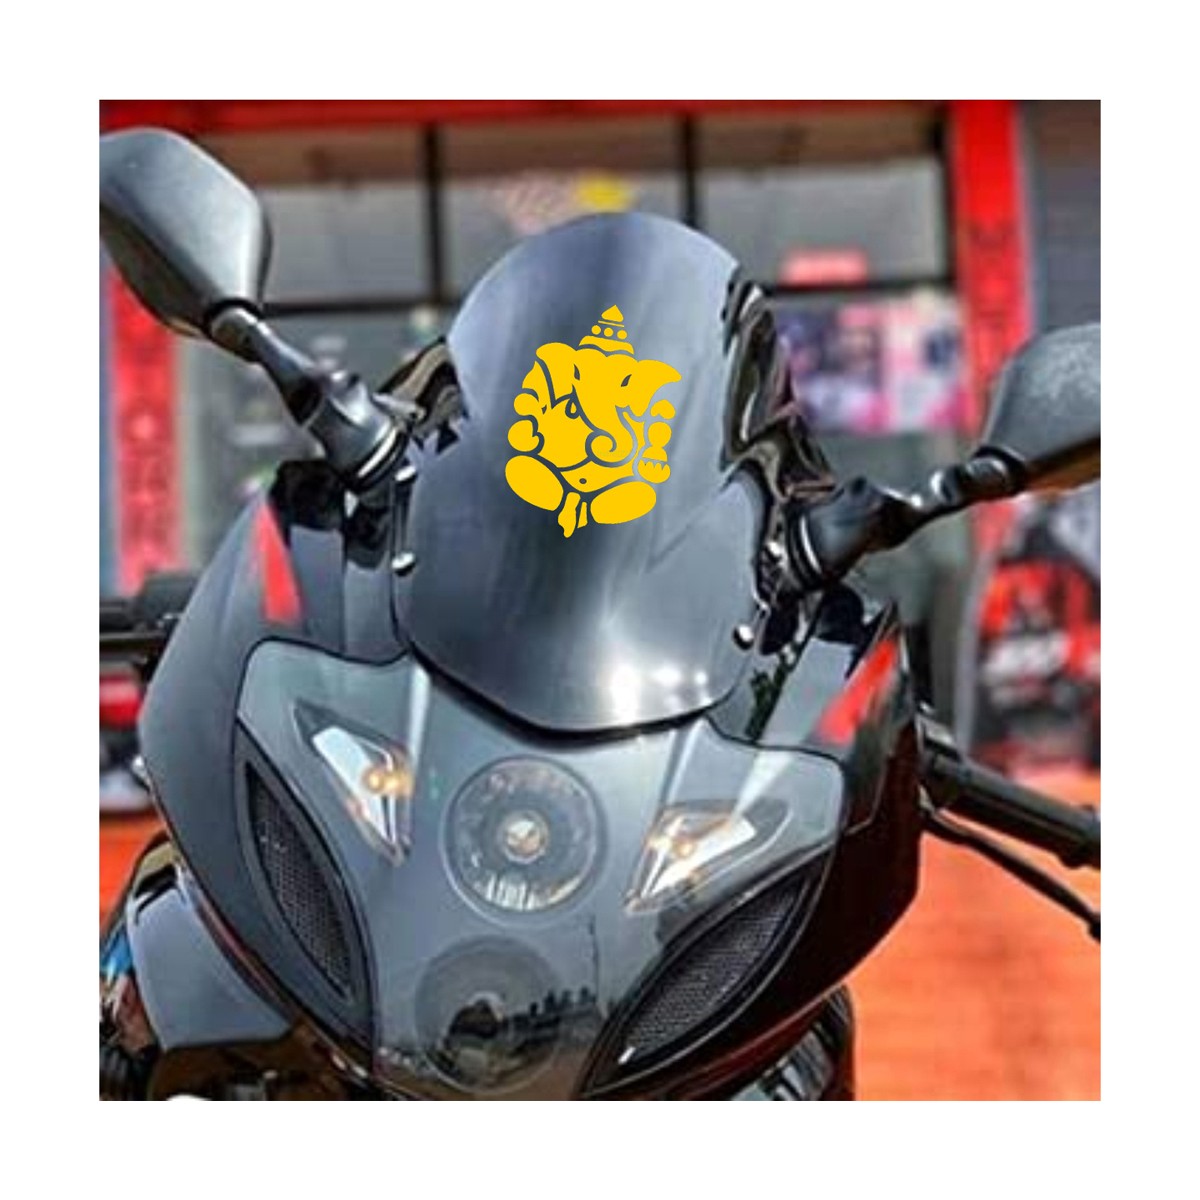 indnone® Lord Vinayagan Logo Sticker for Bike Water Proof PVC Vinyl Decal Sticker | Yellow Color Standard Size